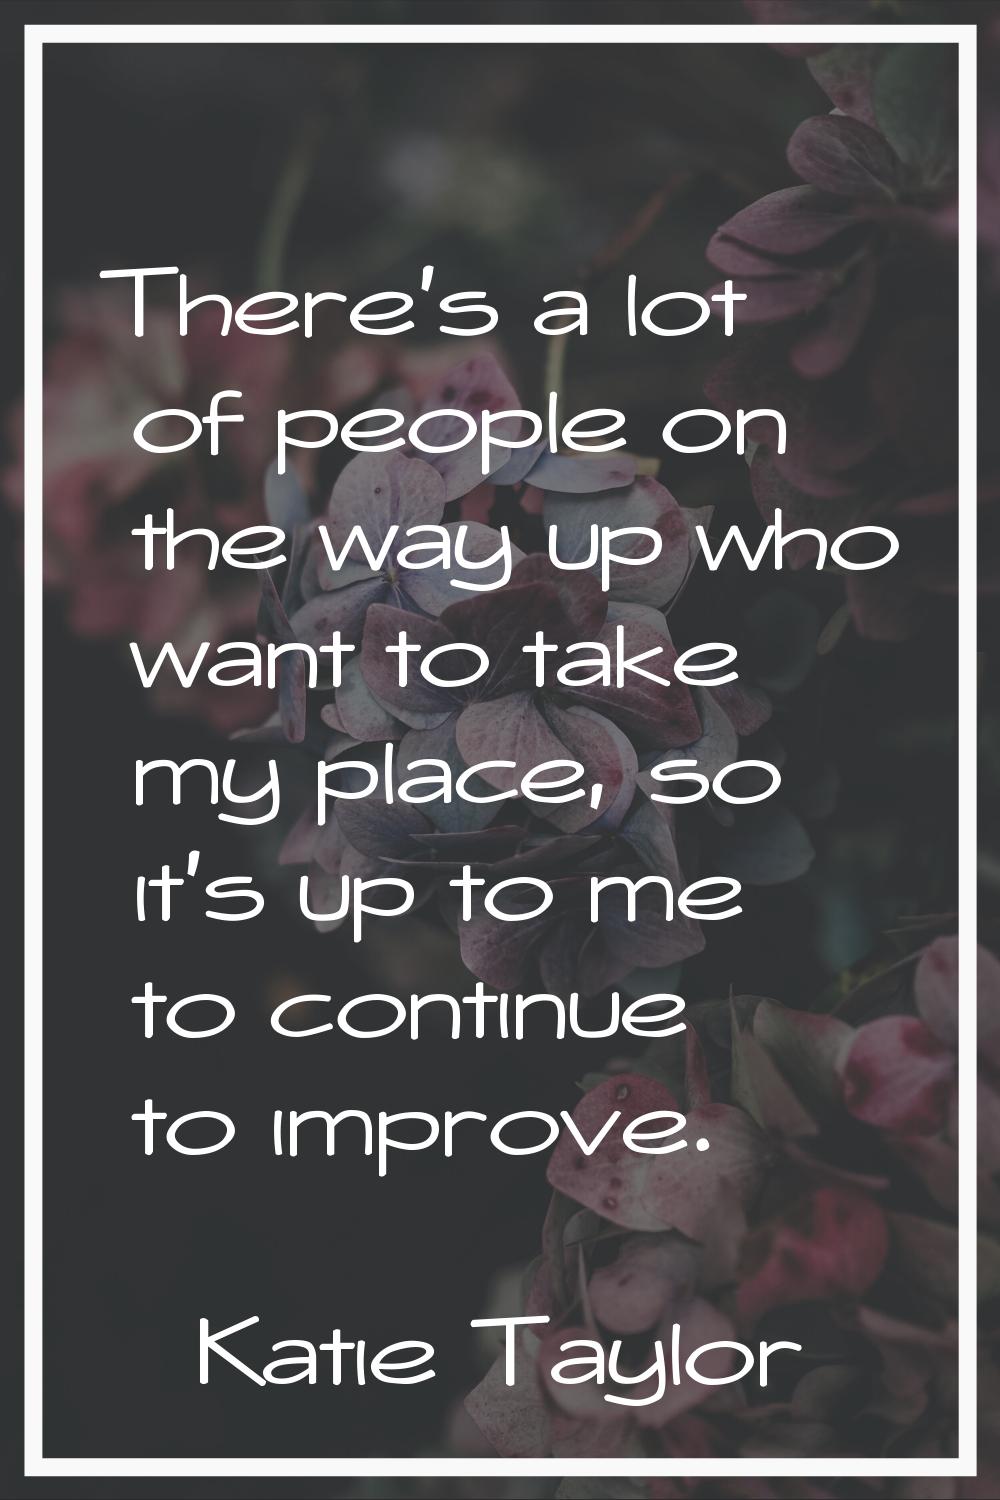 There's a lot of people on the way up who want to take my place, so it's up to me to continue to im